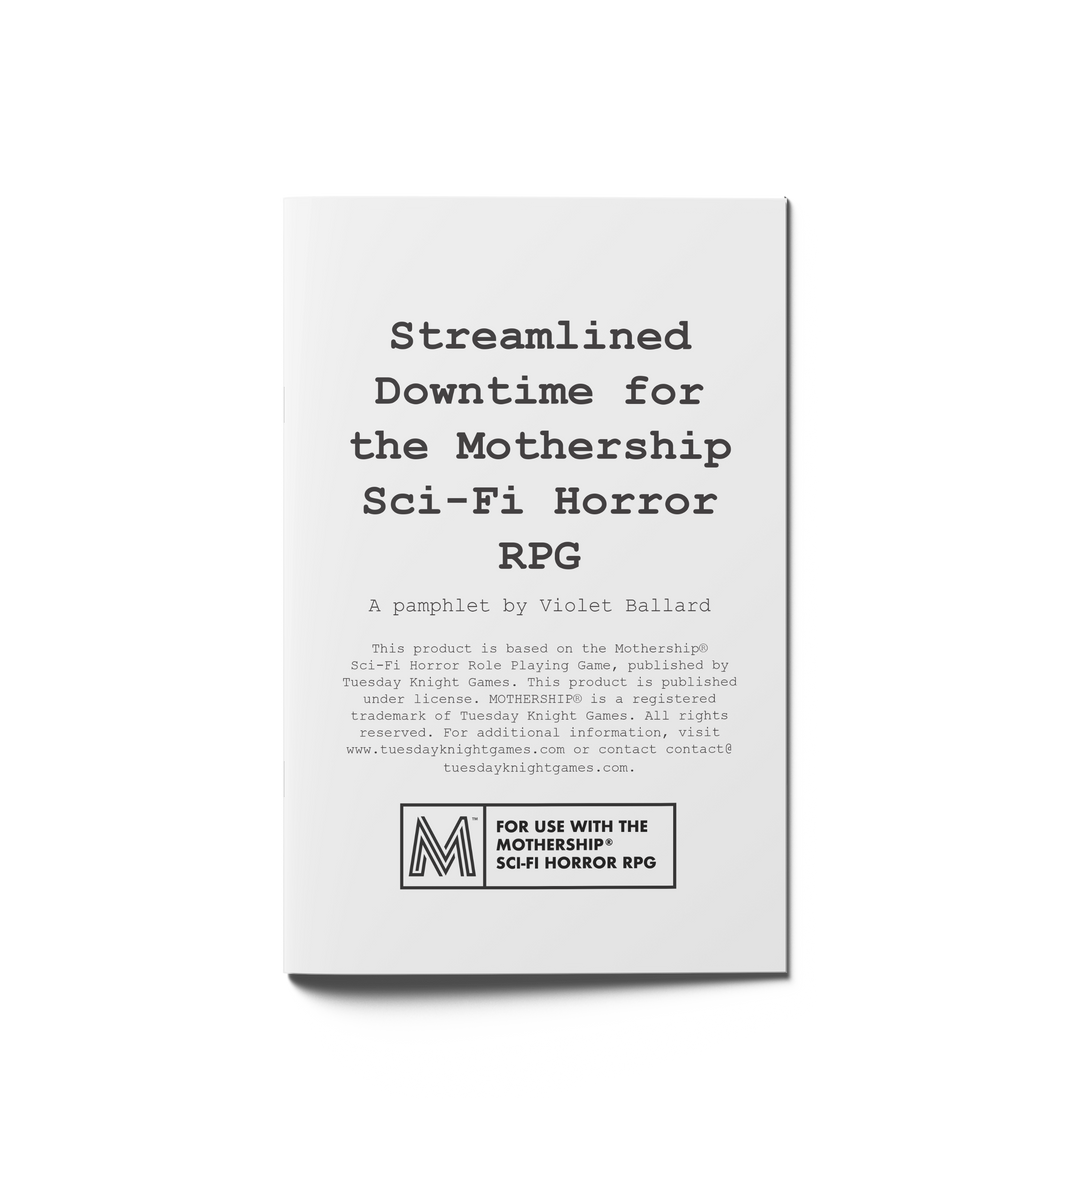 Streamlined Downtime (0e)